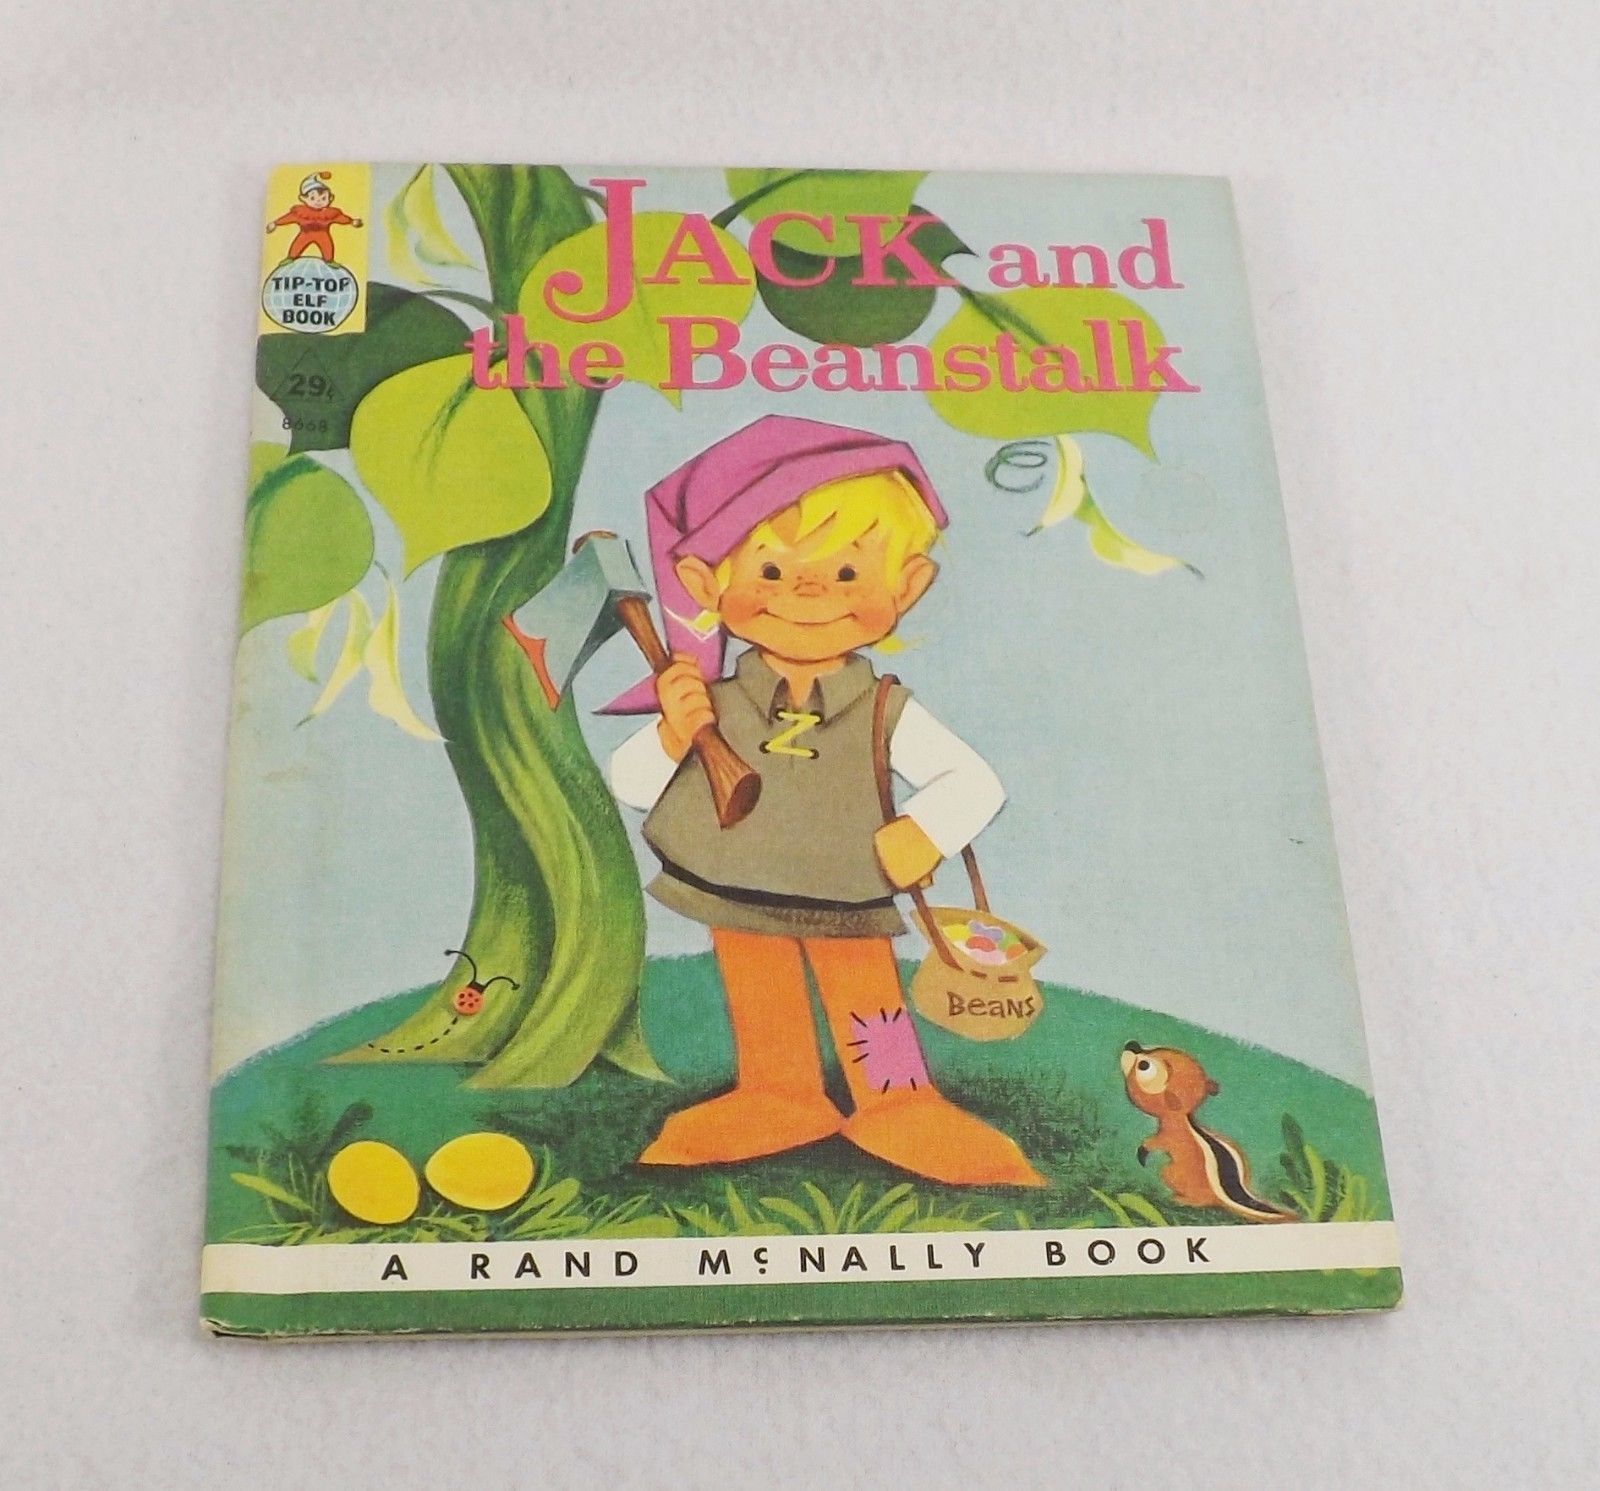 ADORABLE 1961 VINTAGE TIP TOP ELF BOOK JACK AND THE BEANSTALK 1ST EDITION VGC - $4.50